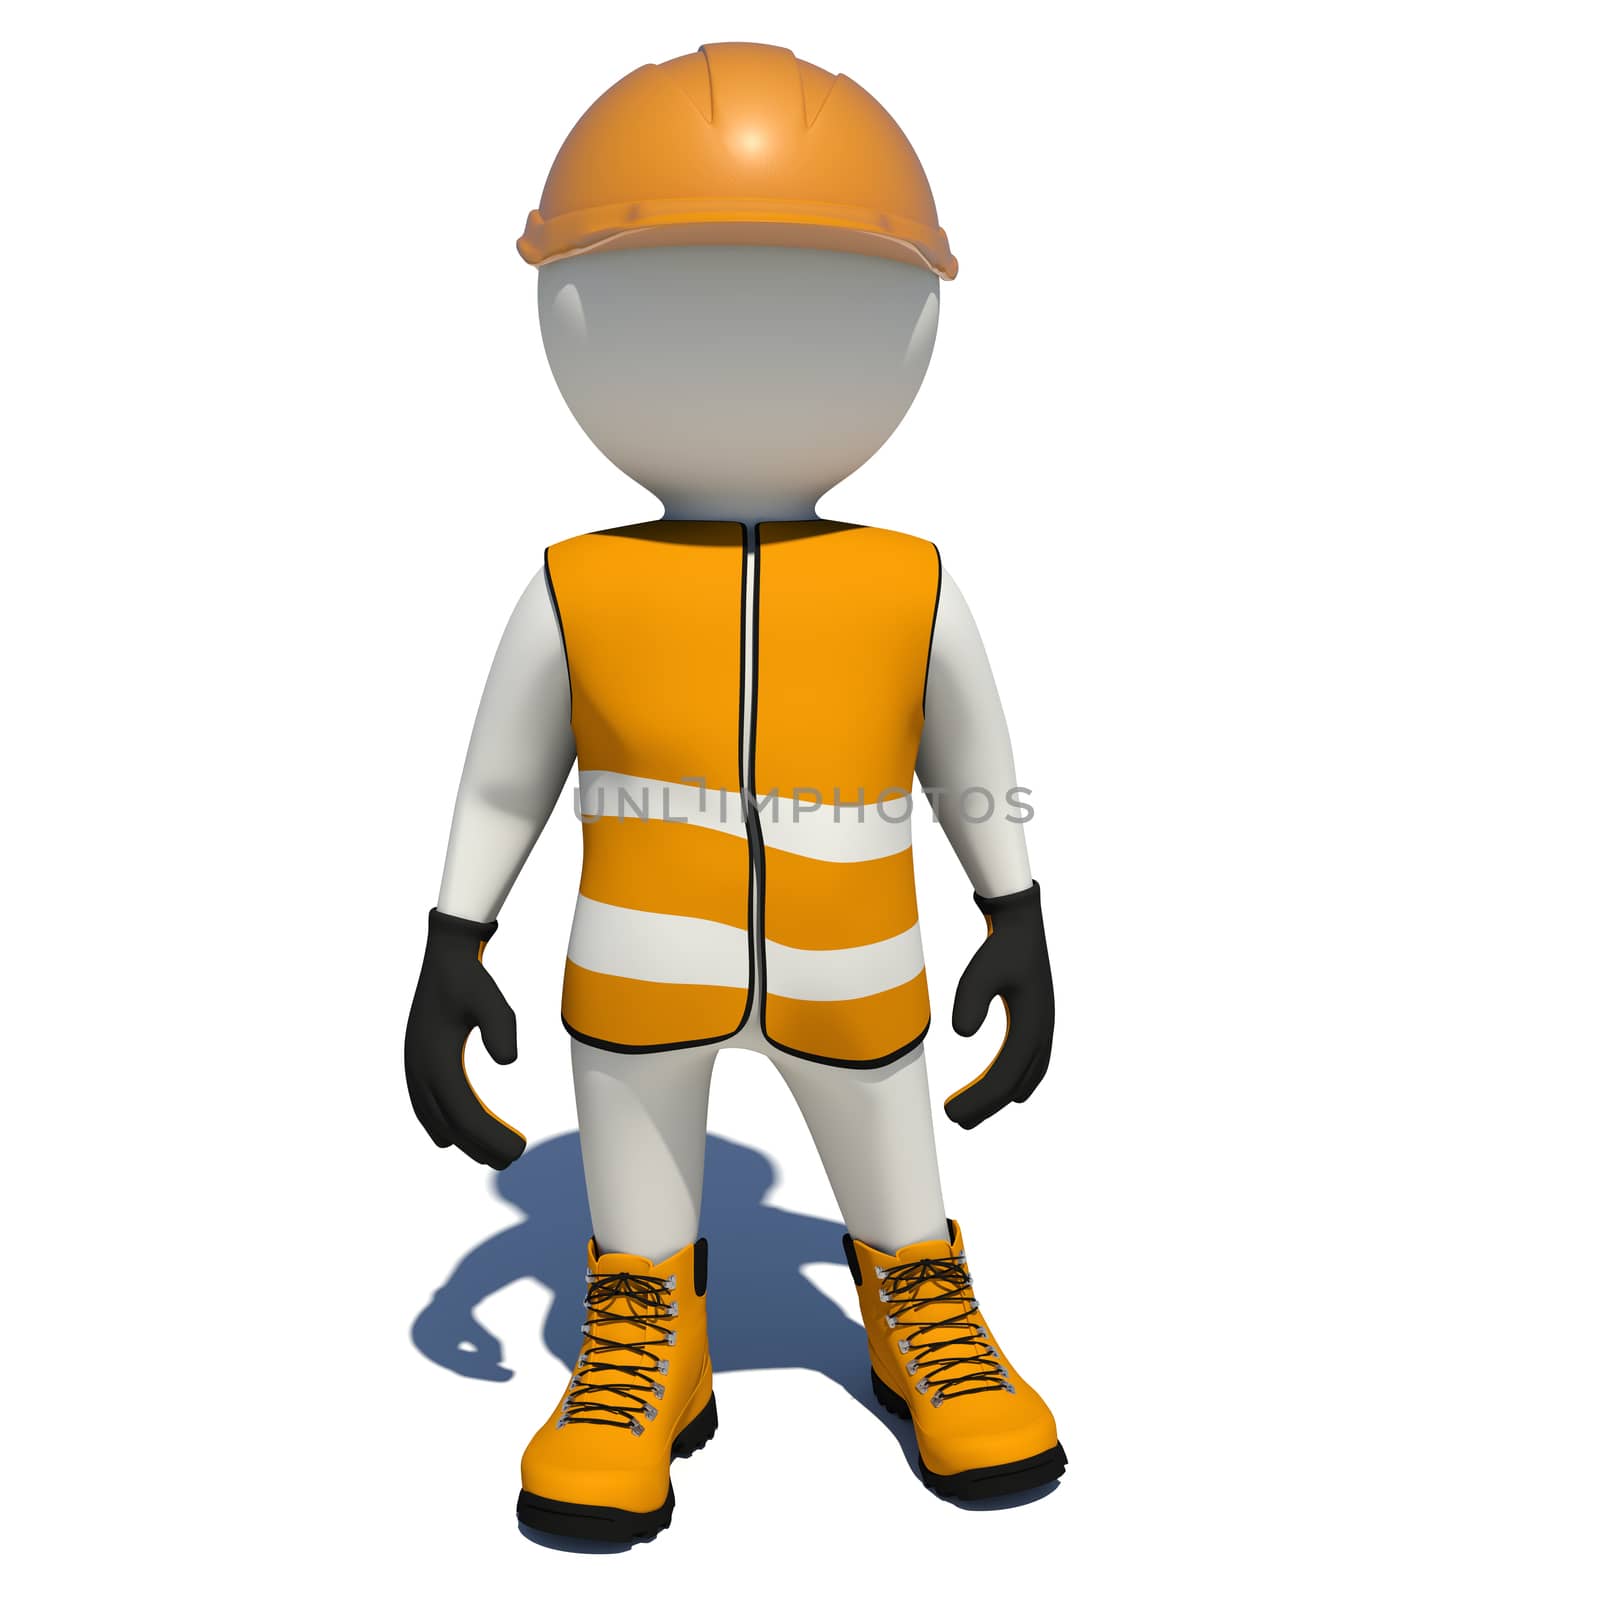 Worker in orange vest, shoes and helmet. Isolated render on white background